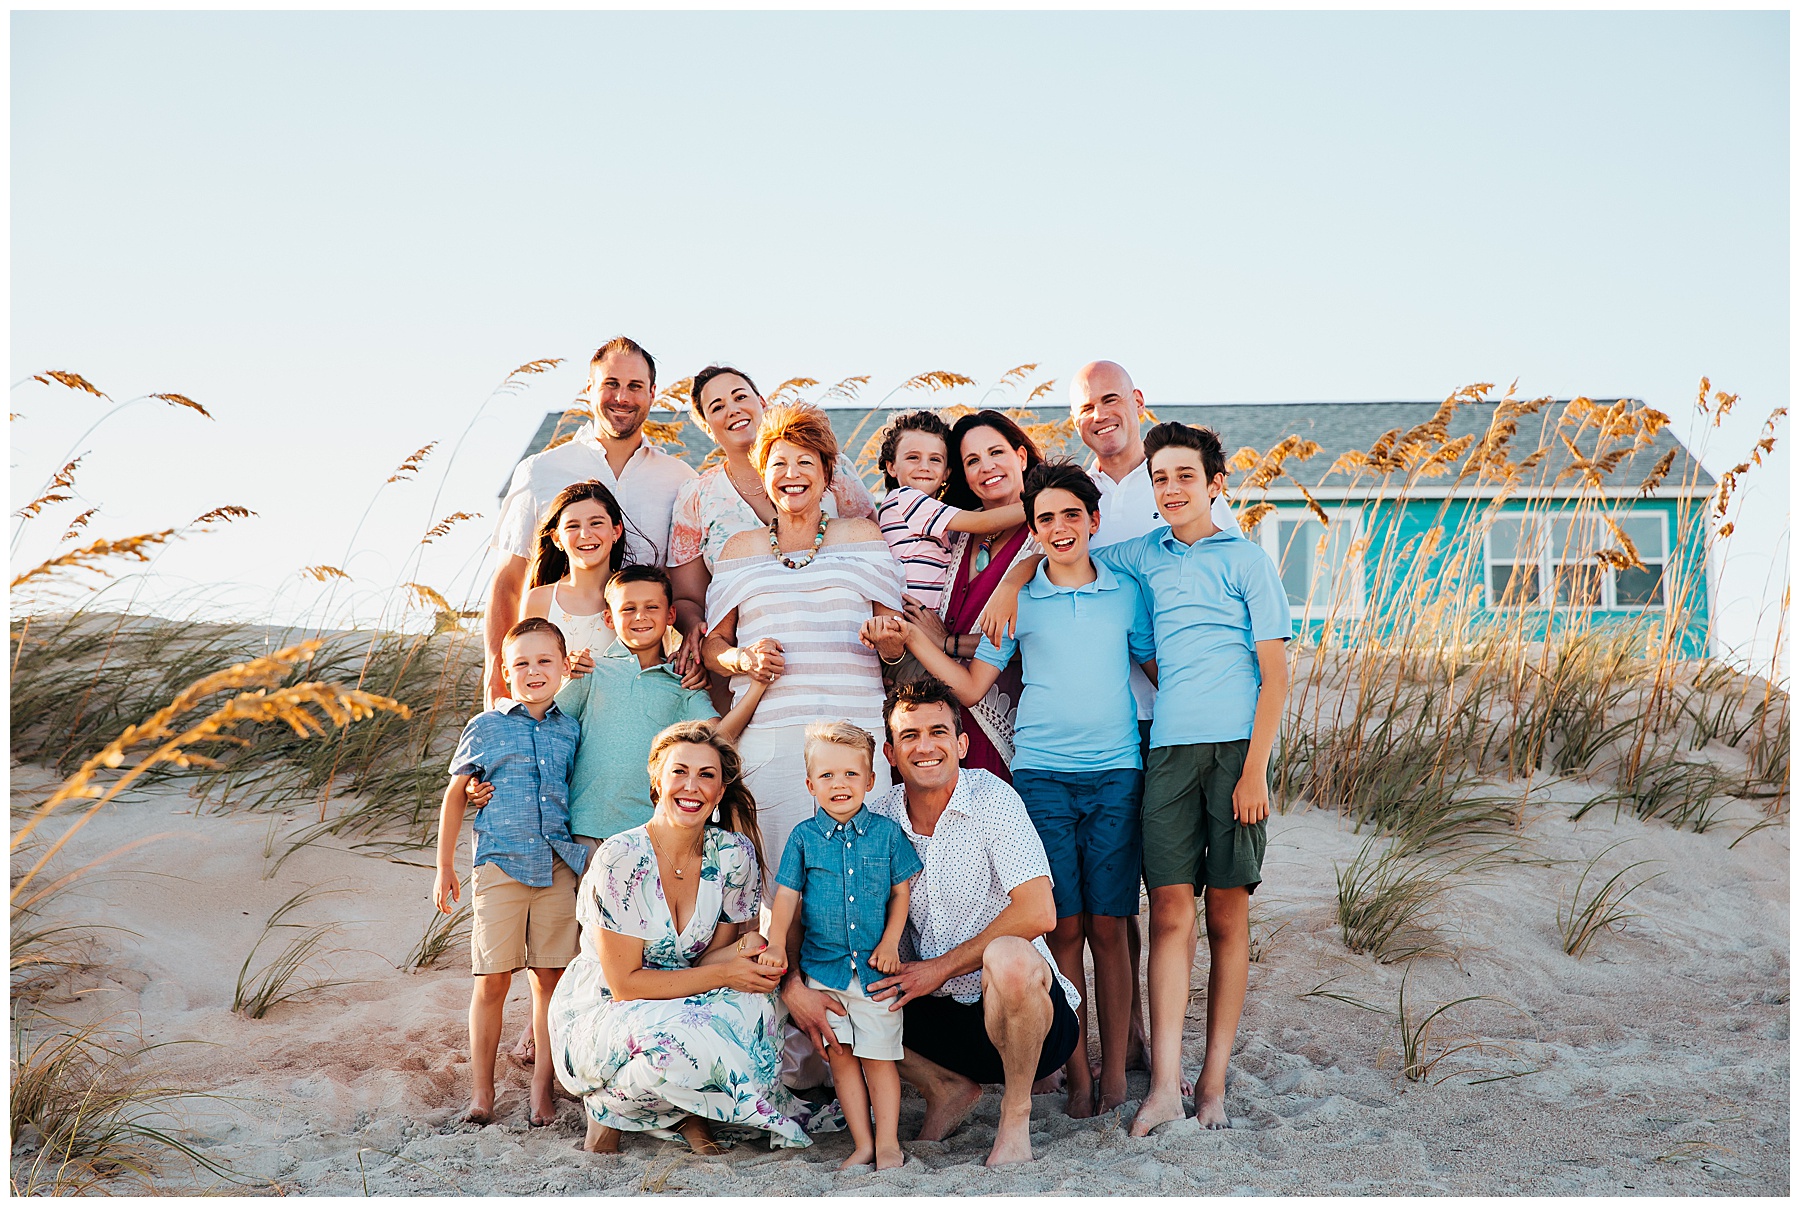 Extended family posing together on the beach.